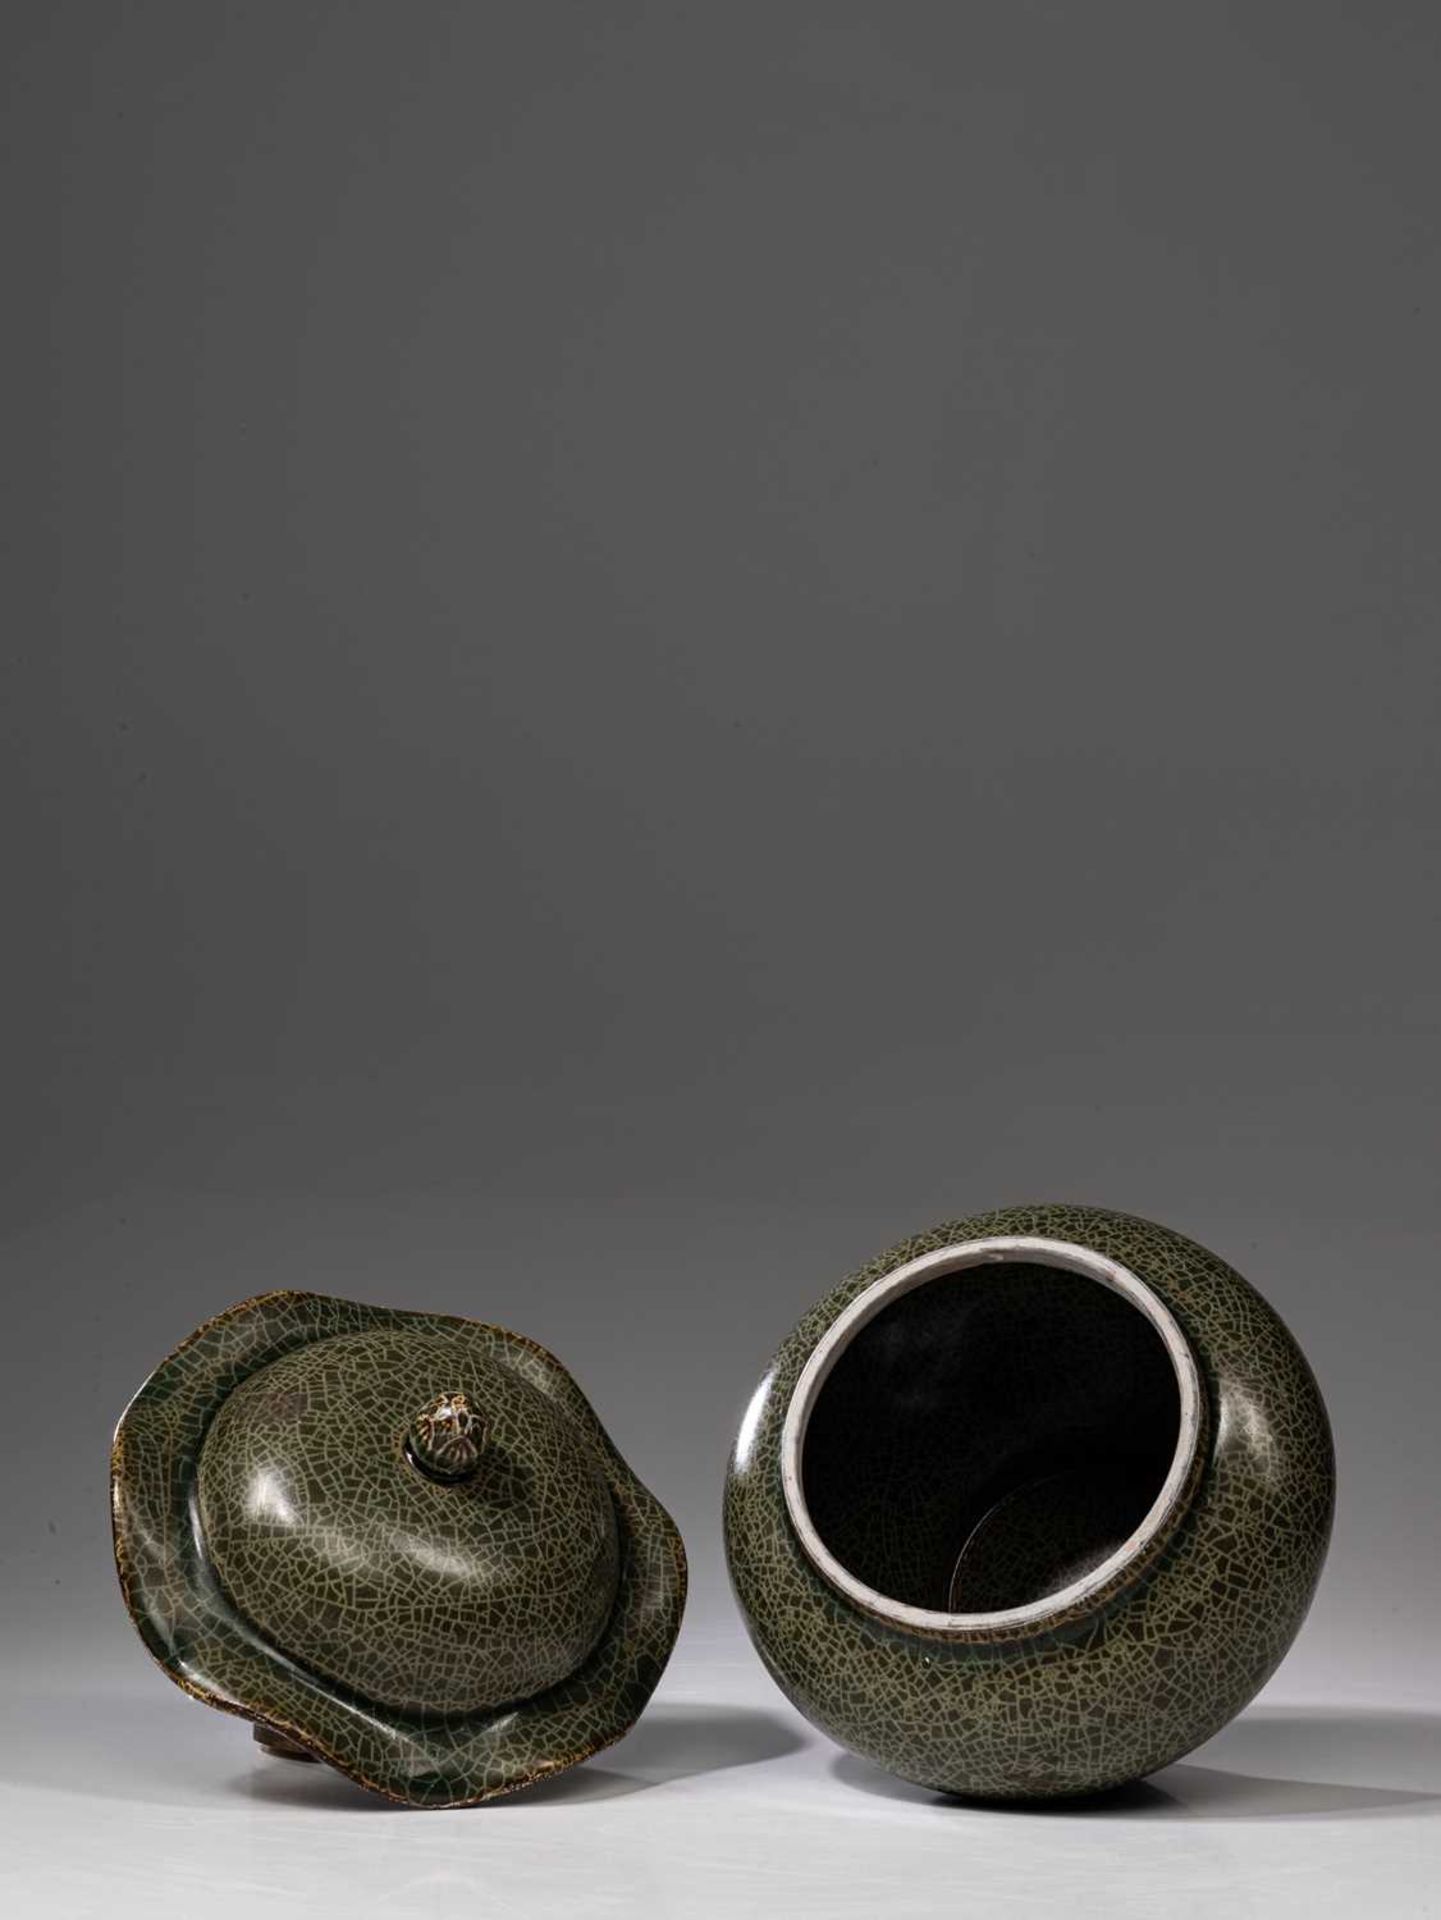 LOTUS SHAPED POT WITH LID - Image 5 of 5